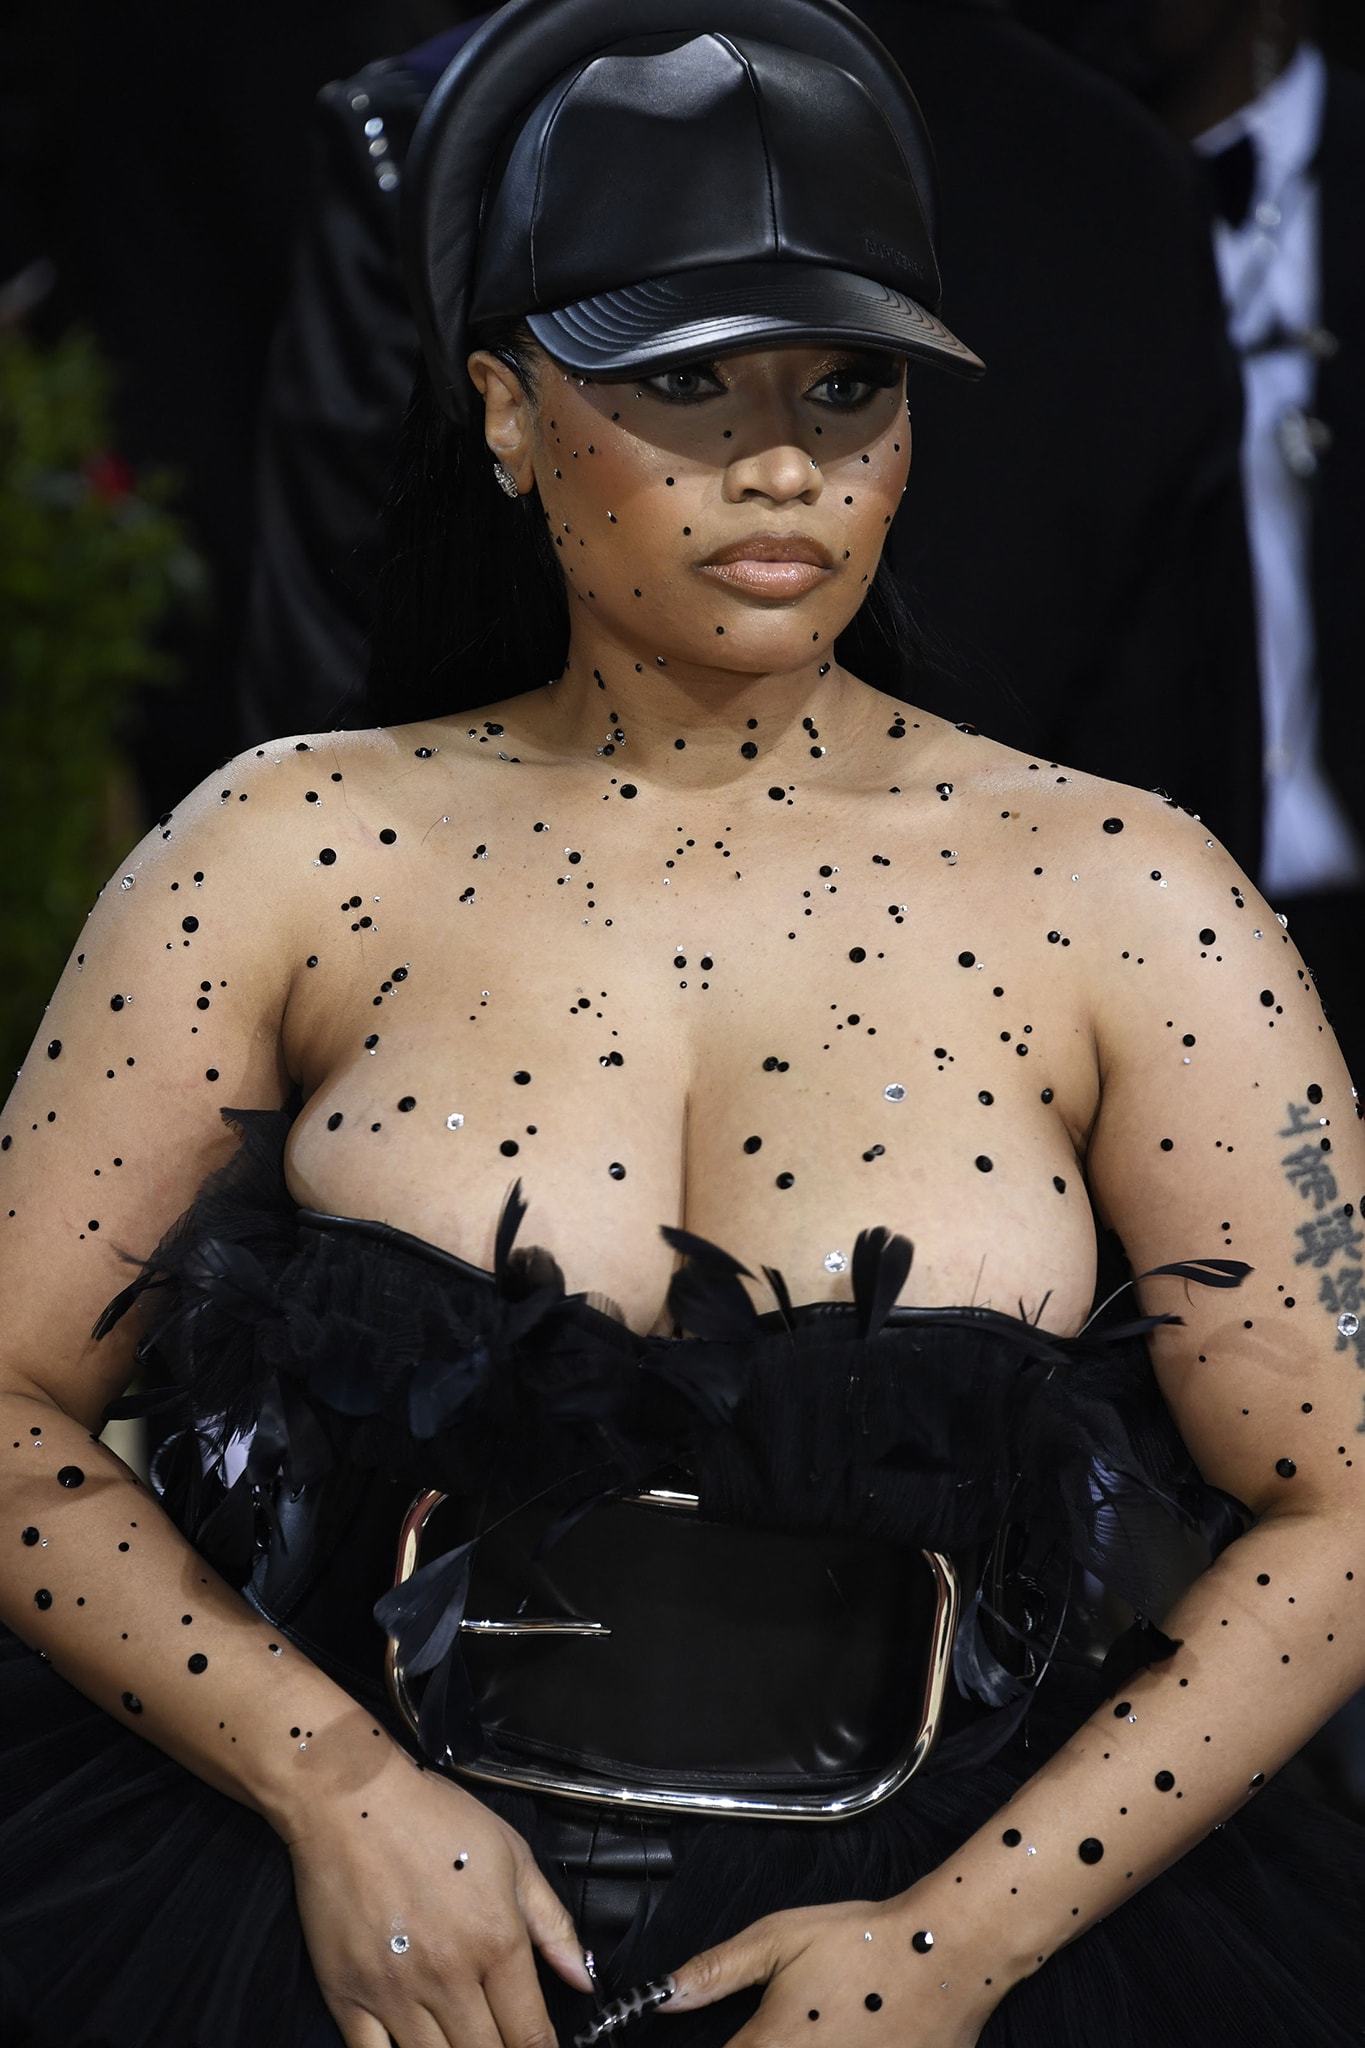 Nicki Minaj has tiny black jewels added to her neck and arms for a Black Swan inspired look